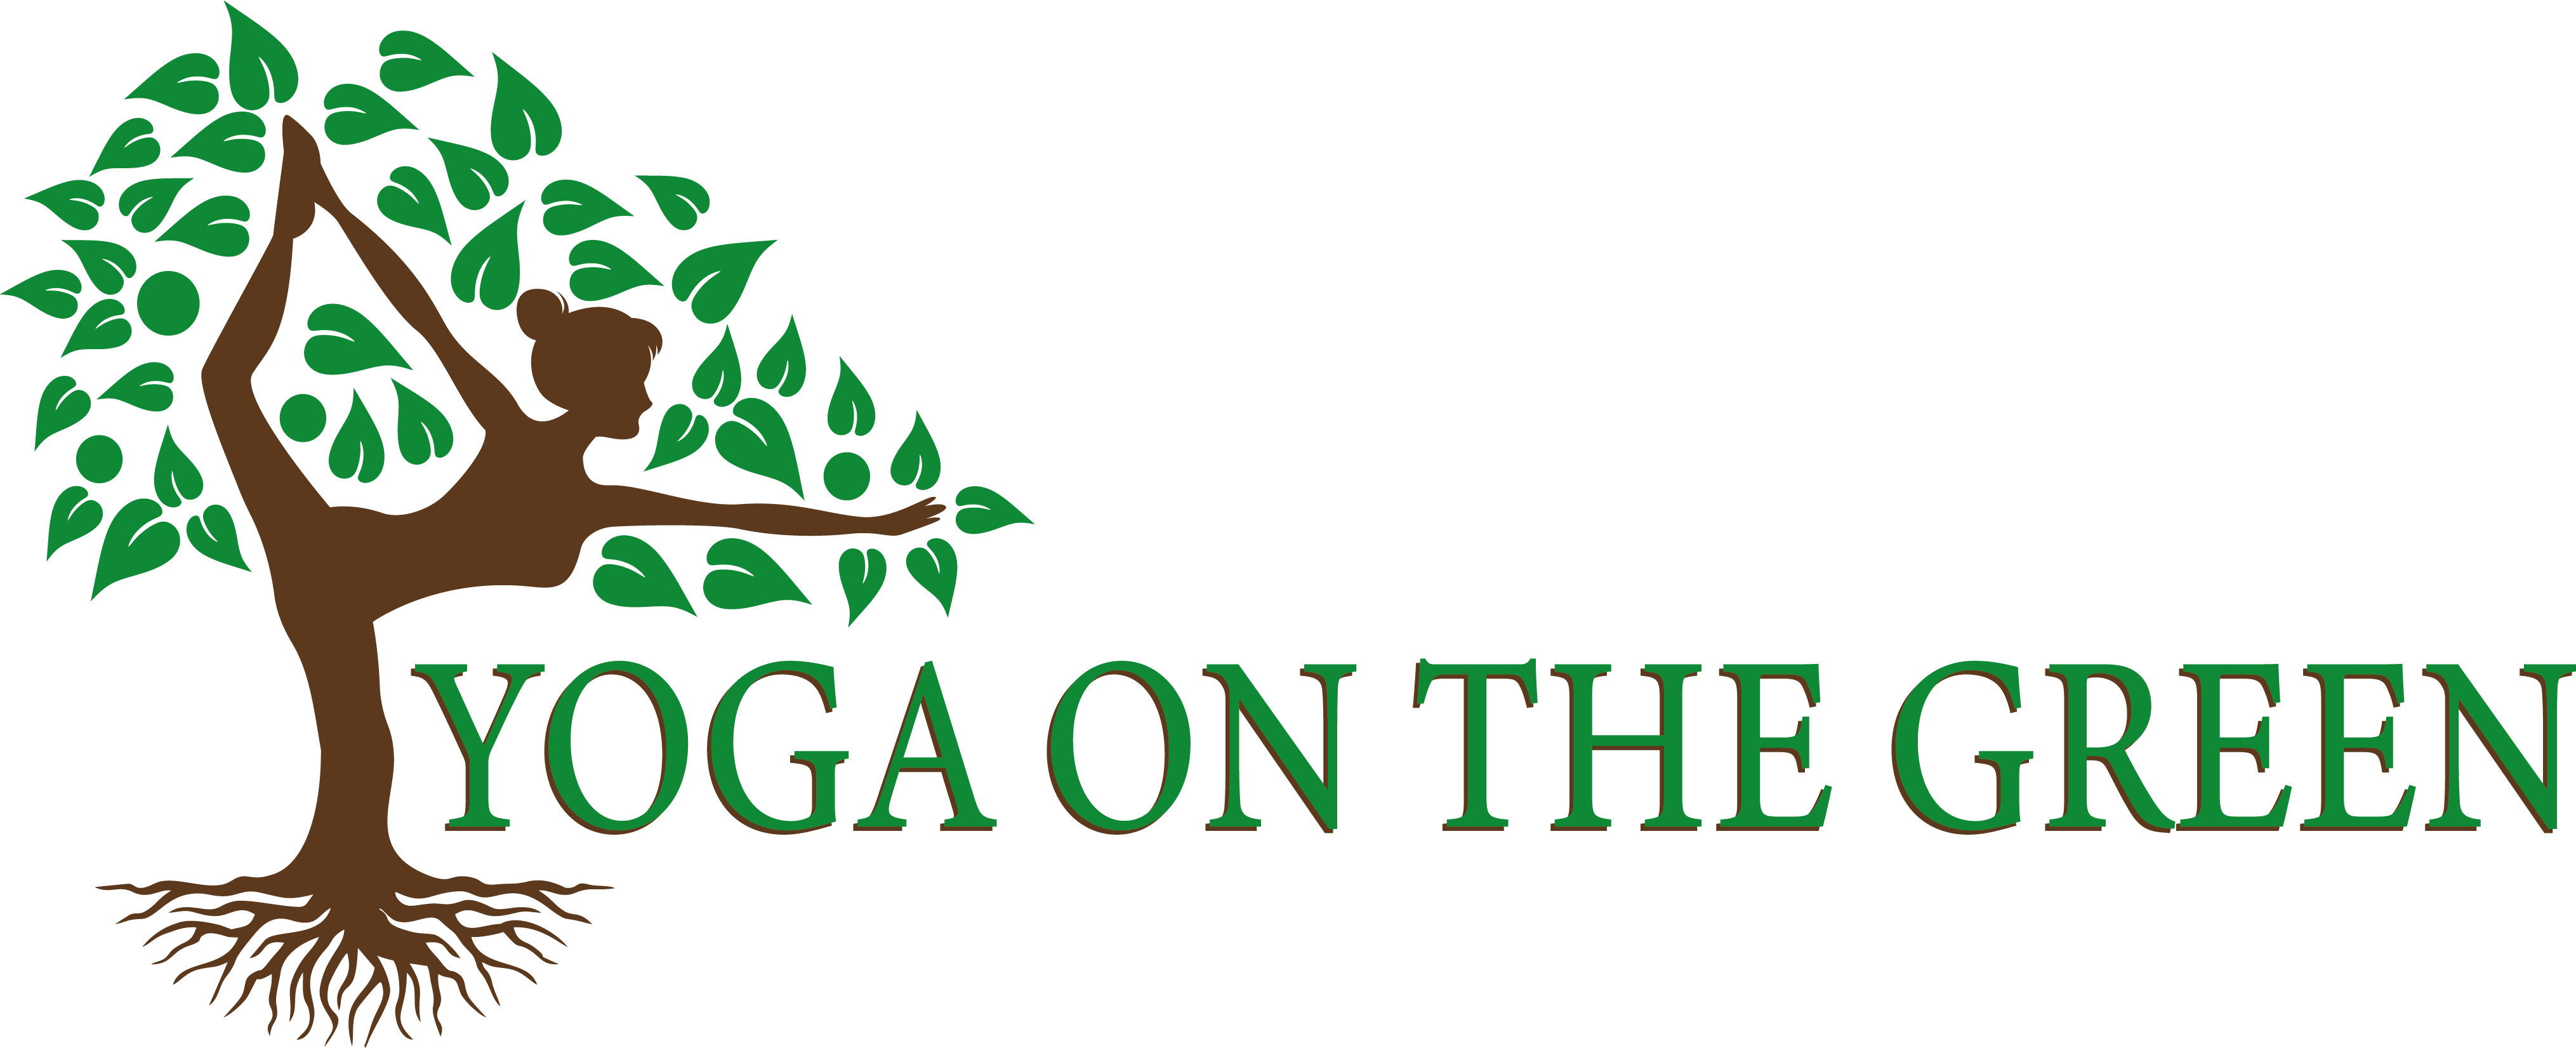 Home - Yoga on the Green